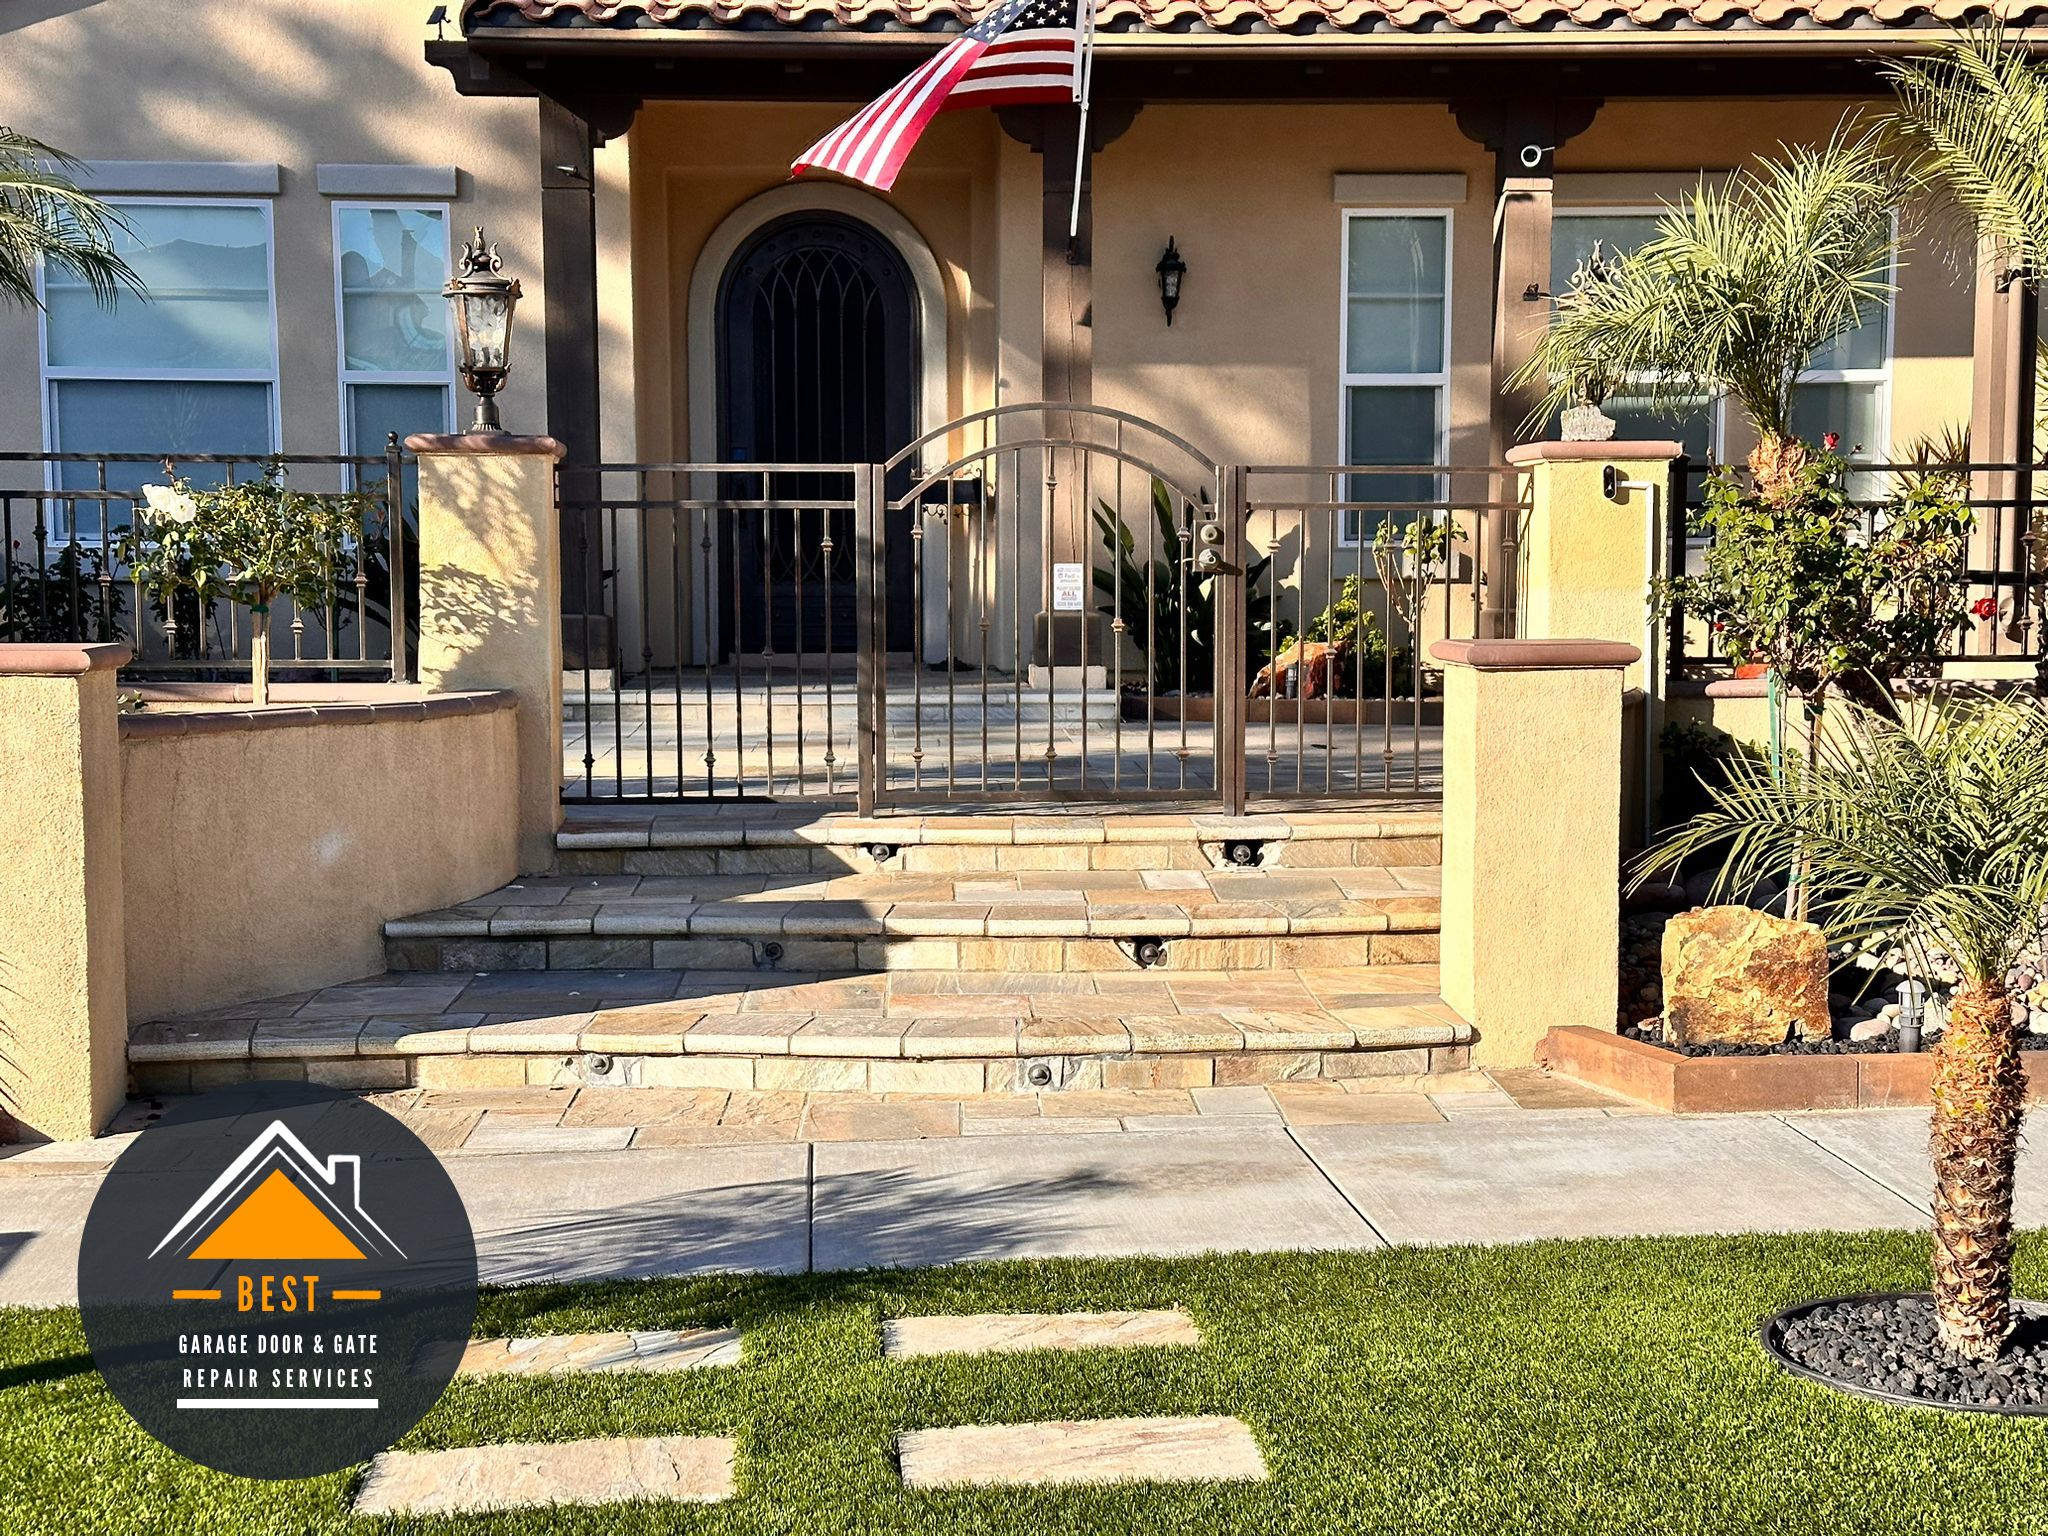 Wrought iron fence, vehicular automated gate, pedestrian gate. DKS access control keypad system. Job done in Scripps Ranch, San Diego 92131.